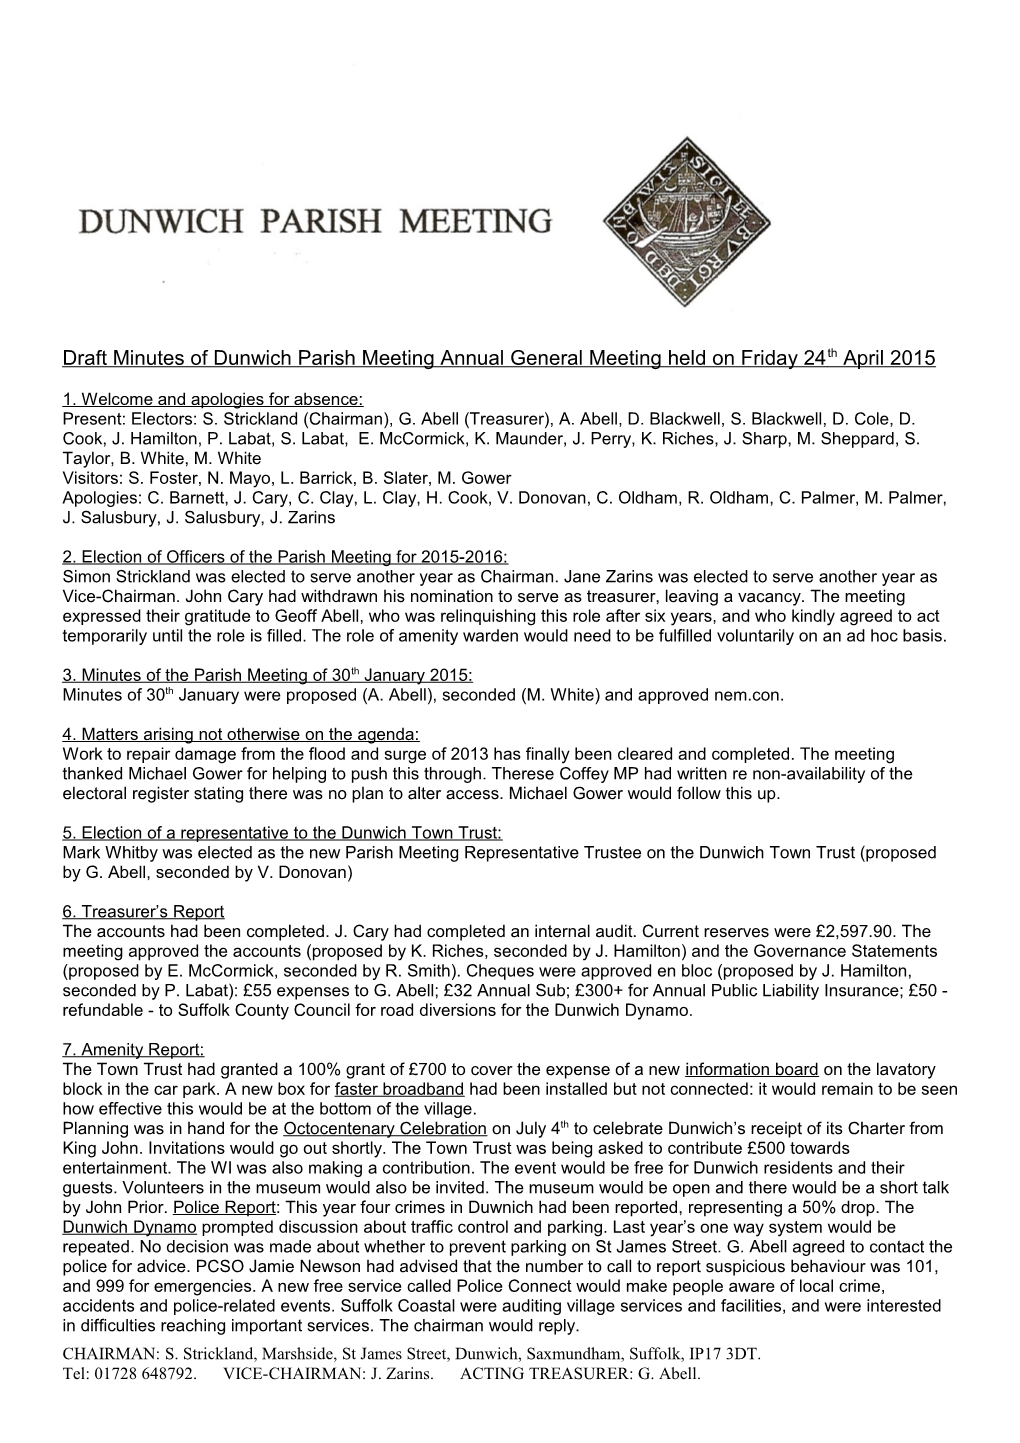 Draft Minutes of Dunwich Parish Meeting Annual General Meeting Held on Friday 24Th April 2015